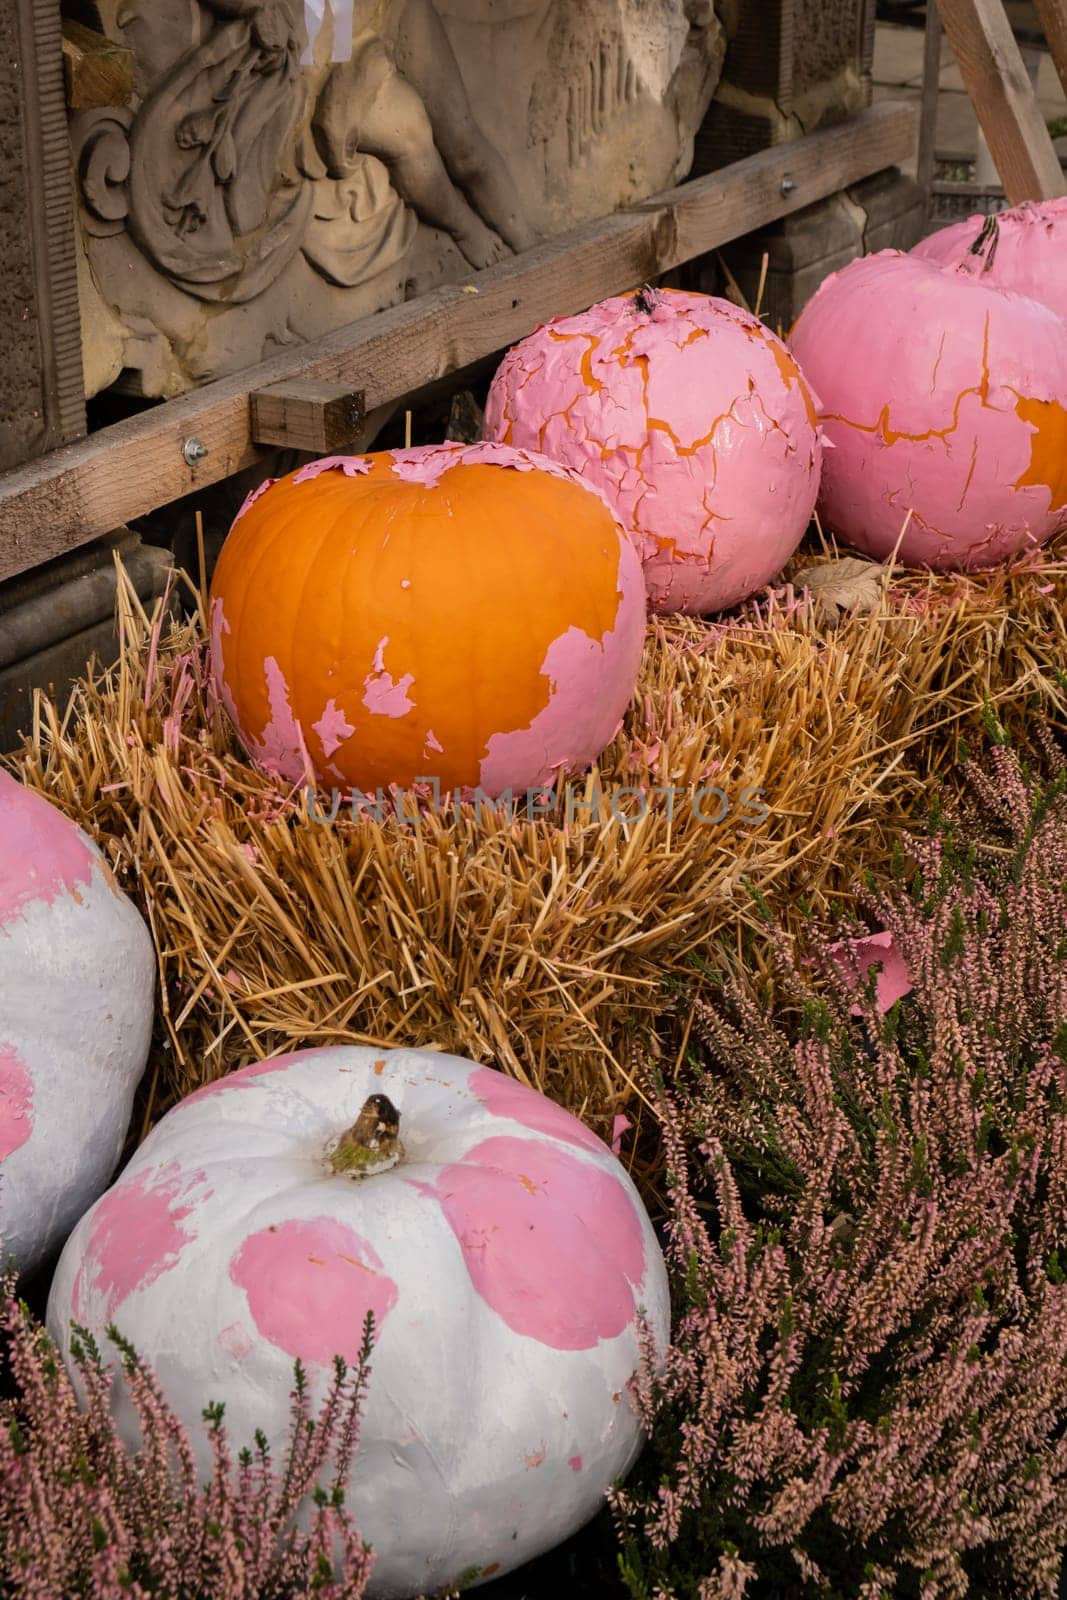 Exterior Beautiful atmospheric halloween pink pumpkins decorated on porch. Autumn leaves and fall flowers celebration holiday Thanksgiving October season outdoors in city